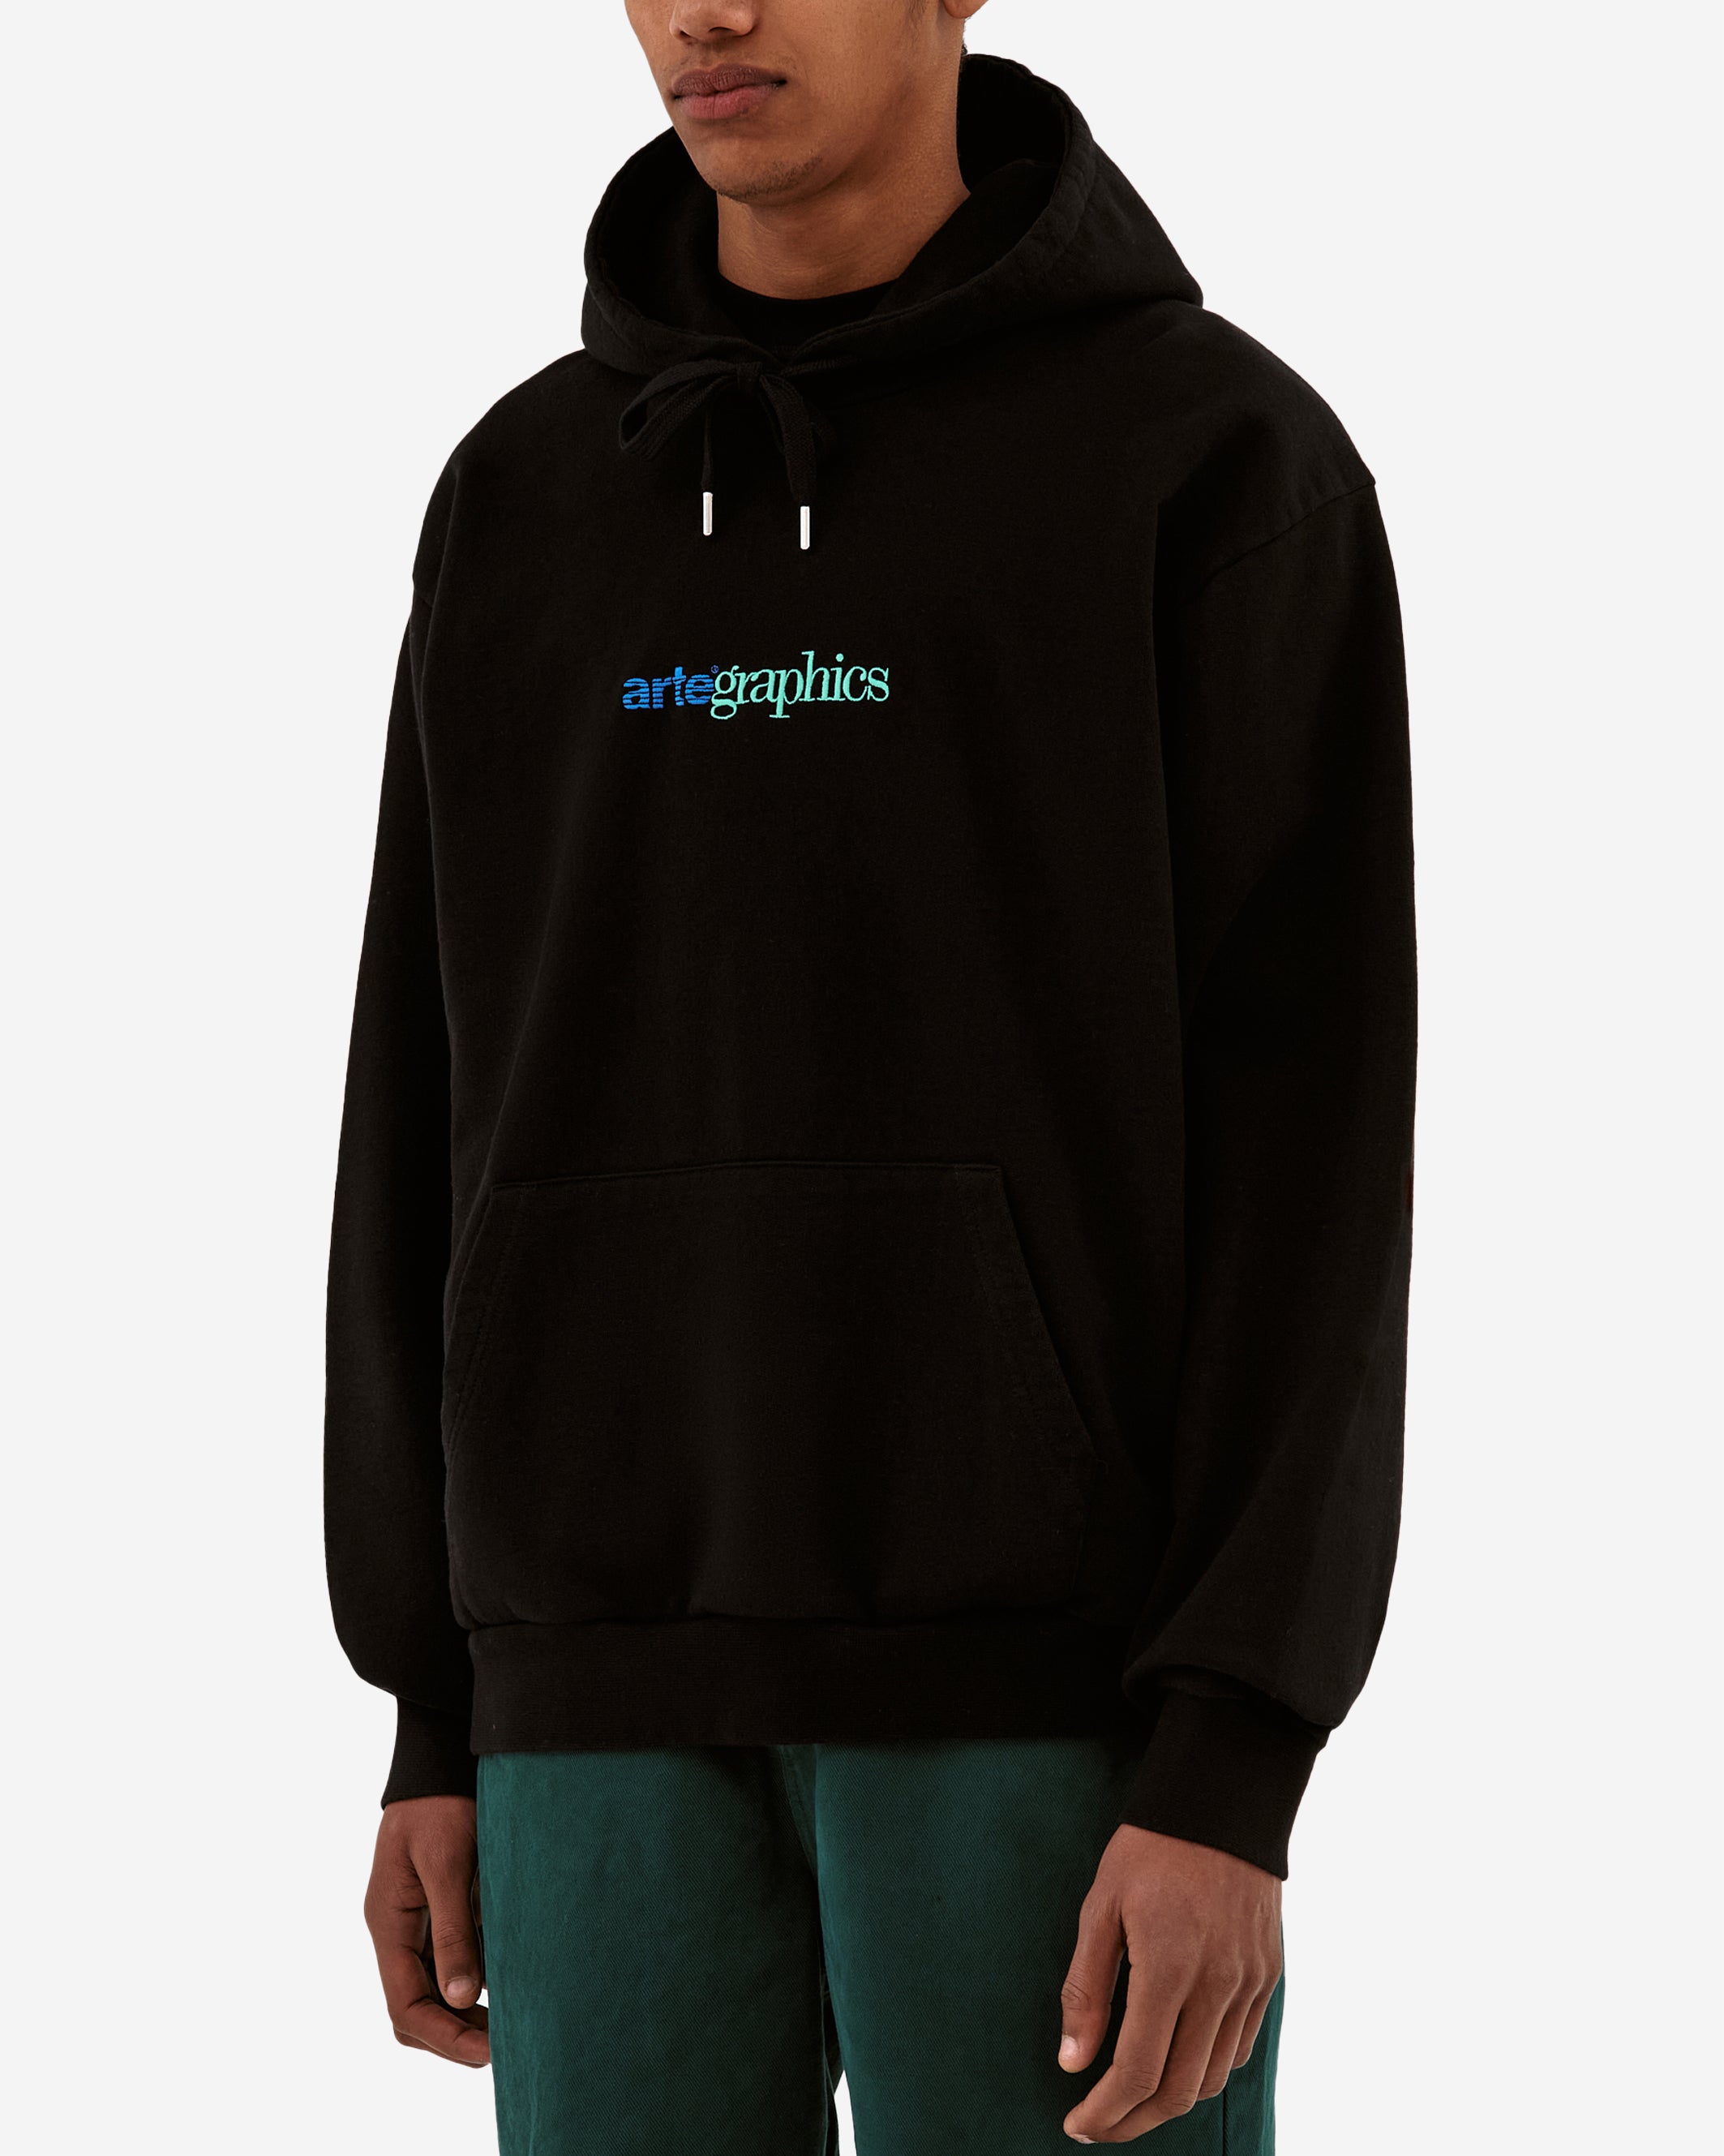 The Harmon Graphic Hoodie is an essential hoodie for this Autumn/Winter collection. The hoodie presents itself with a seasonal graphic print on the front. Made out of premium thick cotton, the hoodie has an adjustable drawstring hood and a kangaroo pocket.